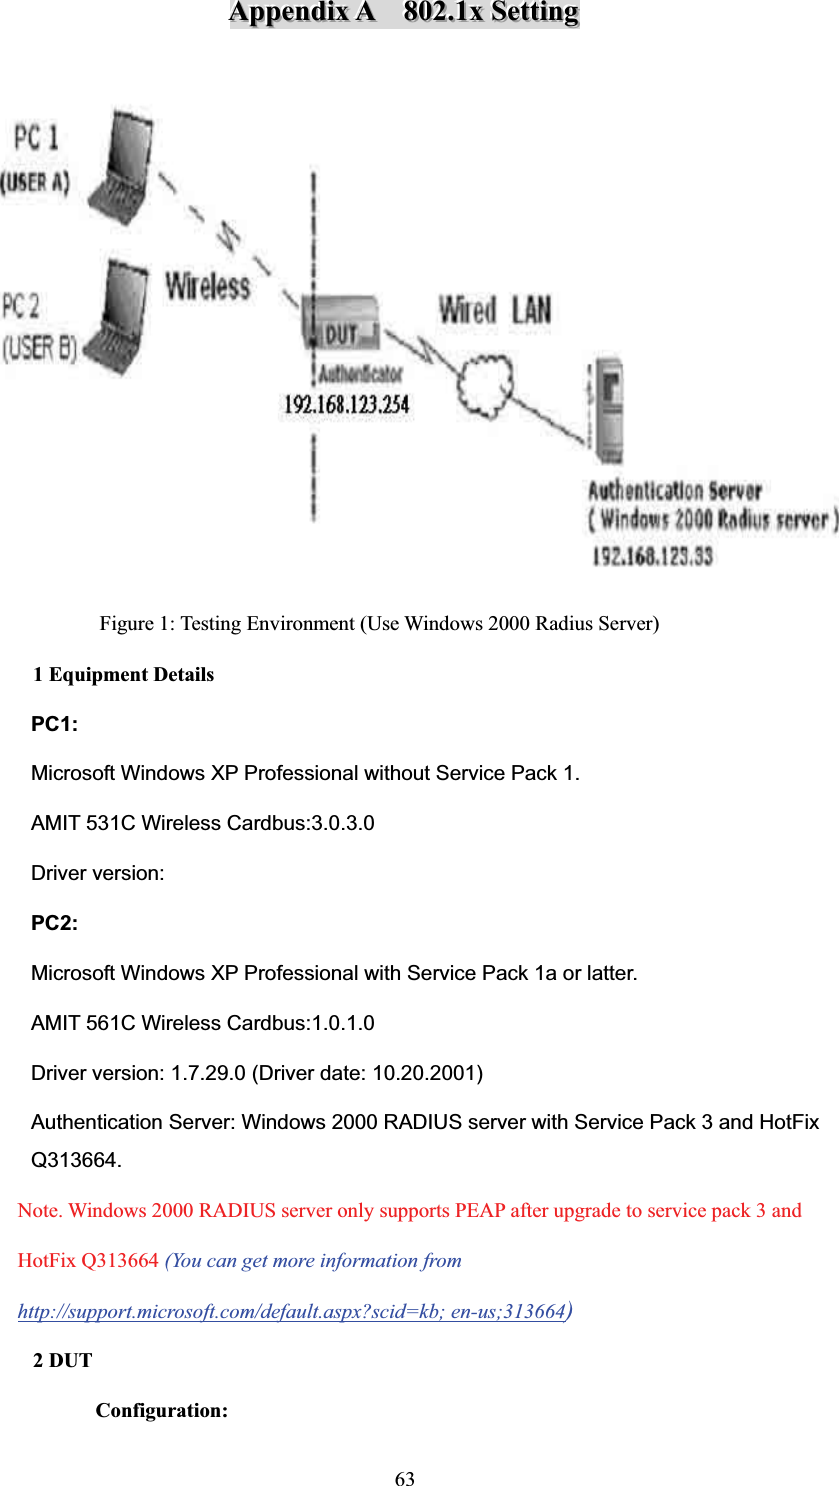 AAAppppppeeennndddiiixxxAAA888000222...111xxxSSSeeettttttiiinnngggFigure 1: Testing Environment (Use Windows 2000 Radius Server) 1 Equipment Details PC1:Microsoft Windows XP Professional without Service Pack 1. AMIT 531C Wireless Cardbus:3.0.3.0 Driver version:   PC2:Microsoft Windows XP Professional with Service Pack 1a or latter. AMIT 561C Wireless Cardbus:1.0.1.0 Driver version: 1.7.29.0 (Driver date: 10.20.2001) Authentication Server: Windows 2000 RADIUS server with Service Pack 3 and HotFix Q313664.     Note. Windows 2000 RADIUS server only supports PEAP after upgrade to service pack 3 and         HotFix Q313664 (You can get more information from       http://support.microsoft.com/default.aspx?scid=kb; en-us;313664)2 DUT   Configuration: 63